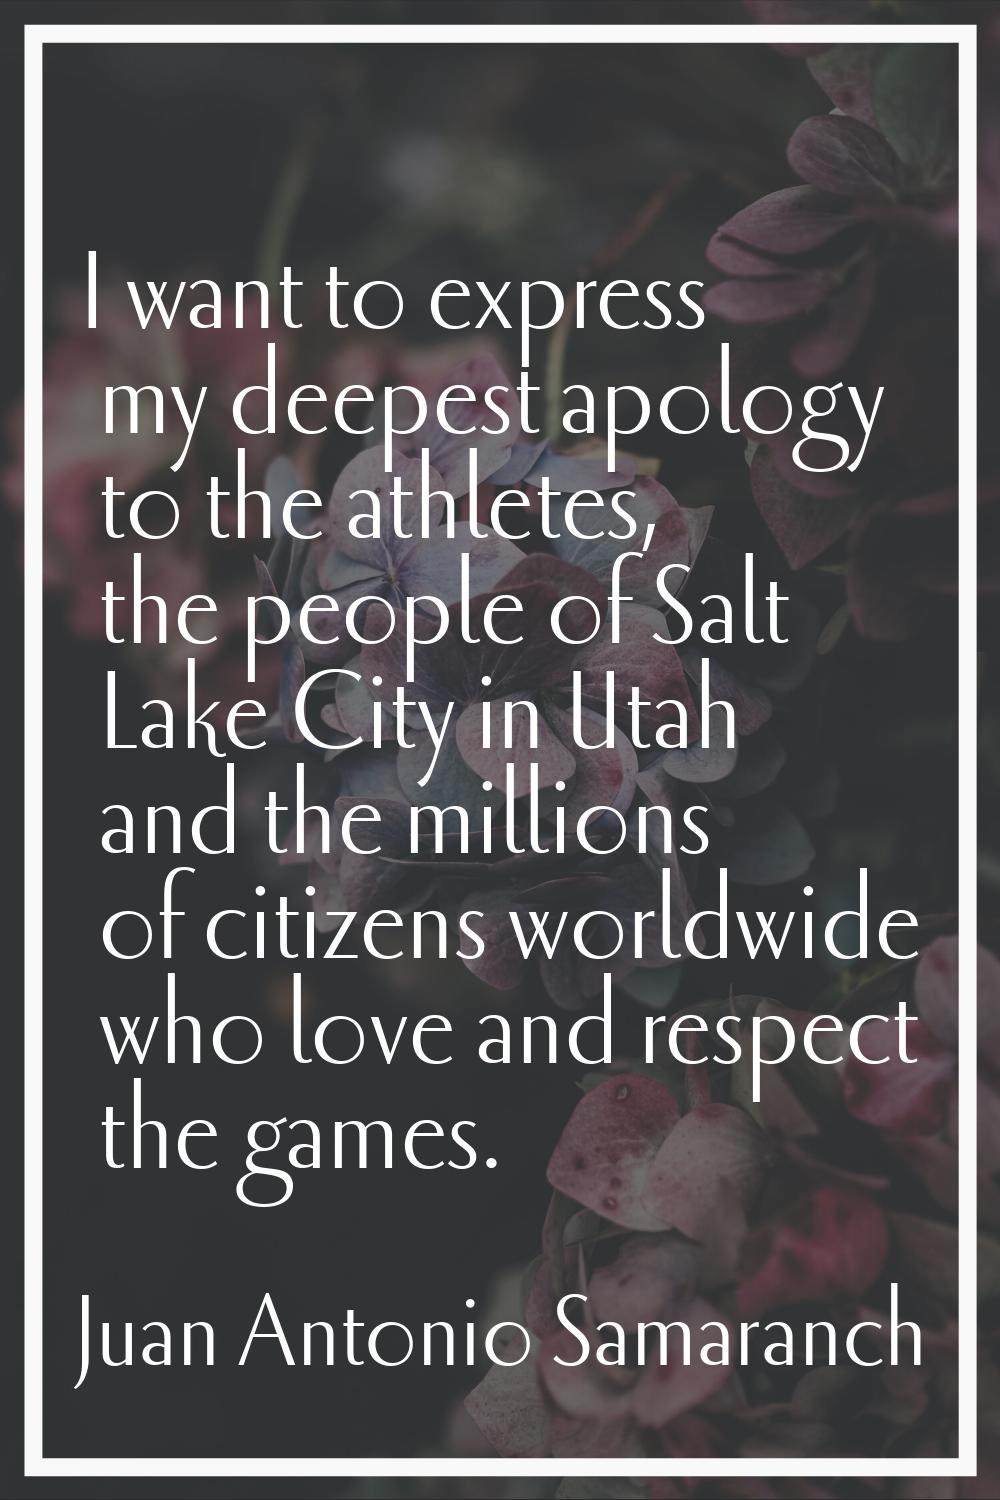 I want to express my deepest apology to the athletes, the people of Salt Lake City in Utah and the 